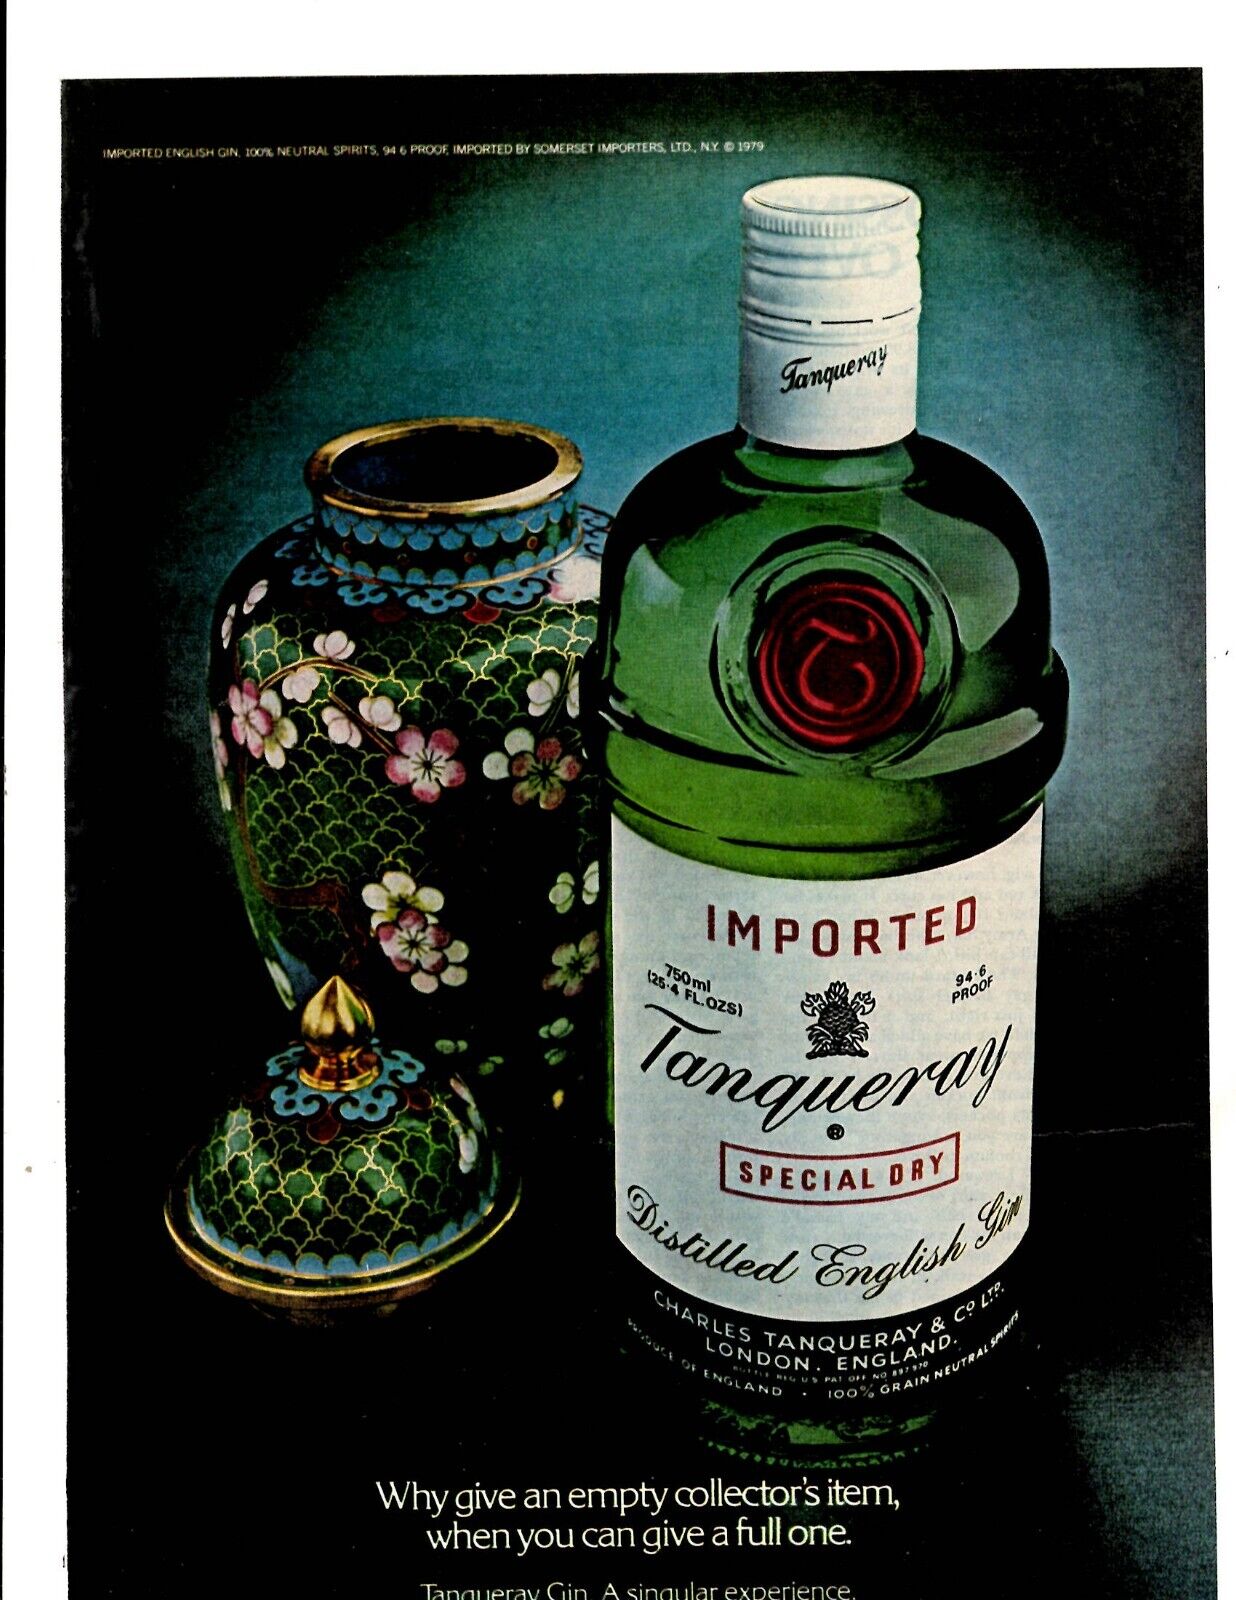 1980 Print Ad  Tanquerray Special Dry Distilled English Gin Imported Cloisonne